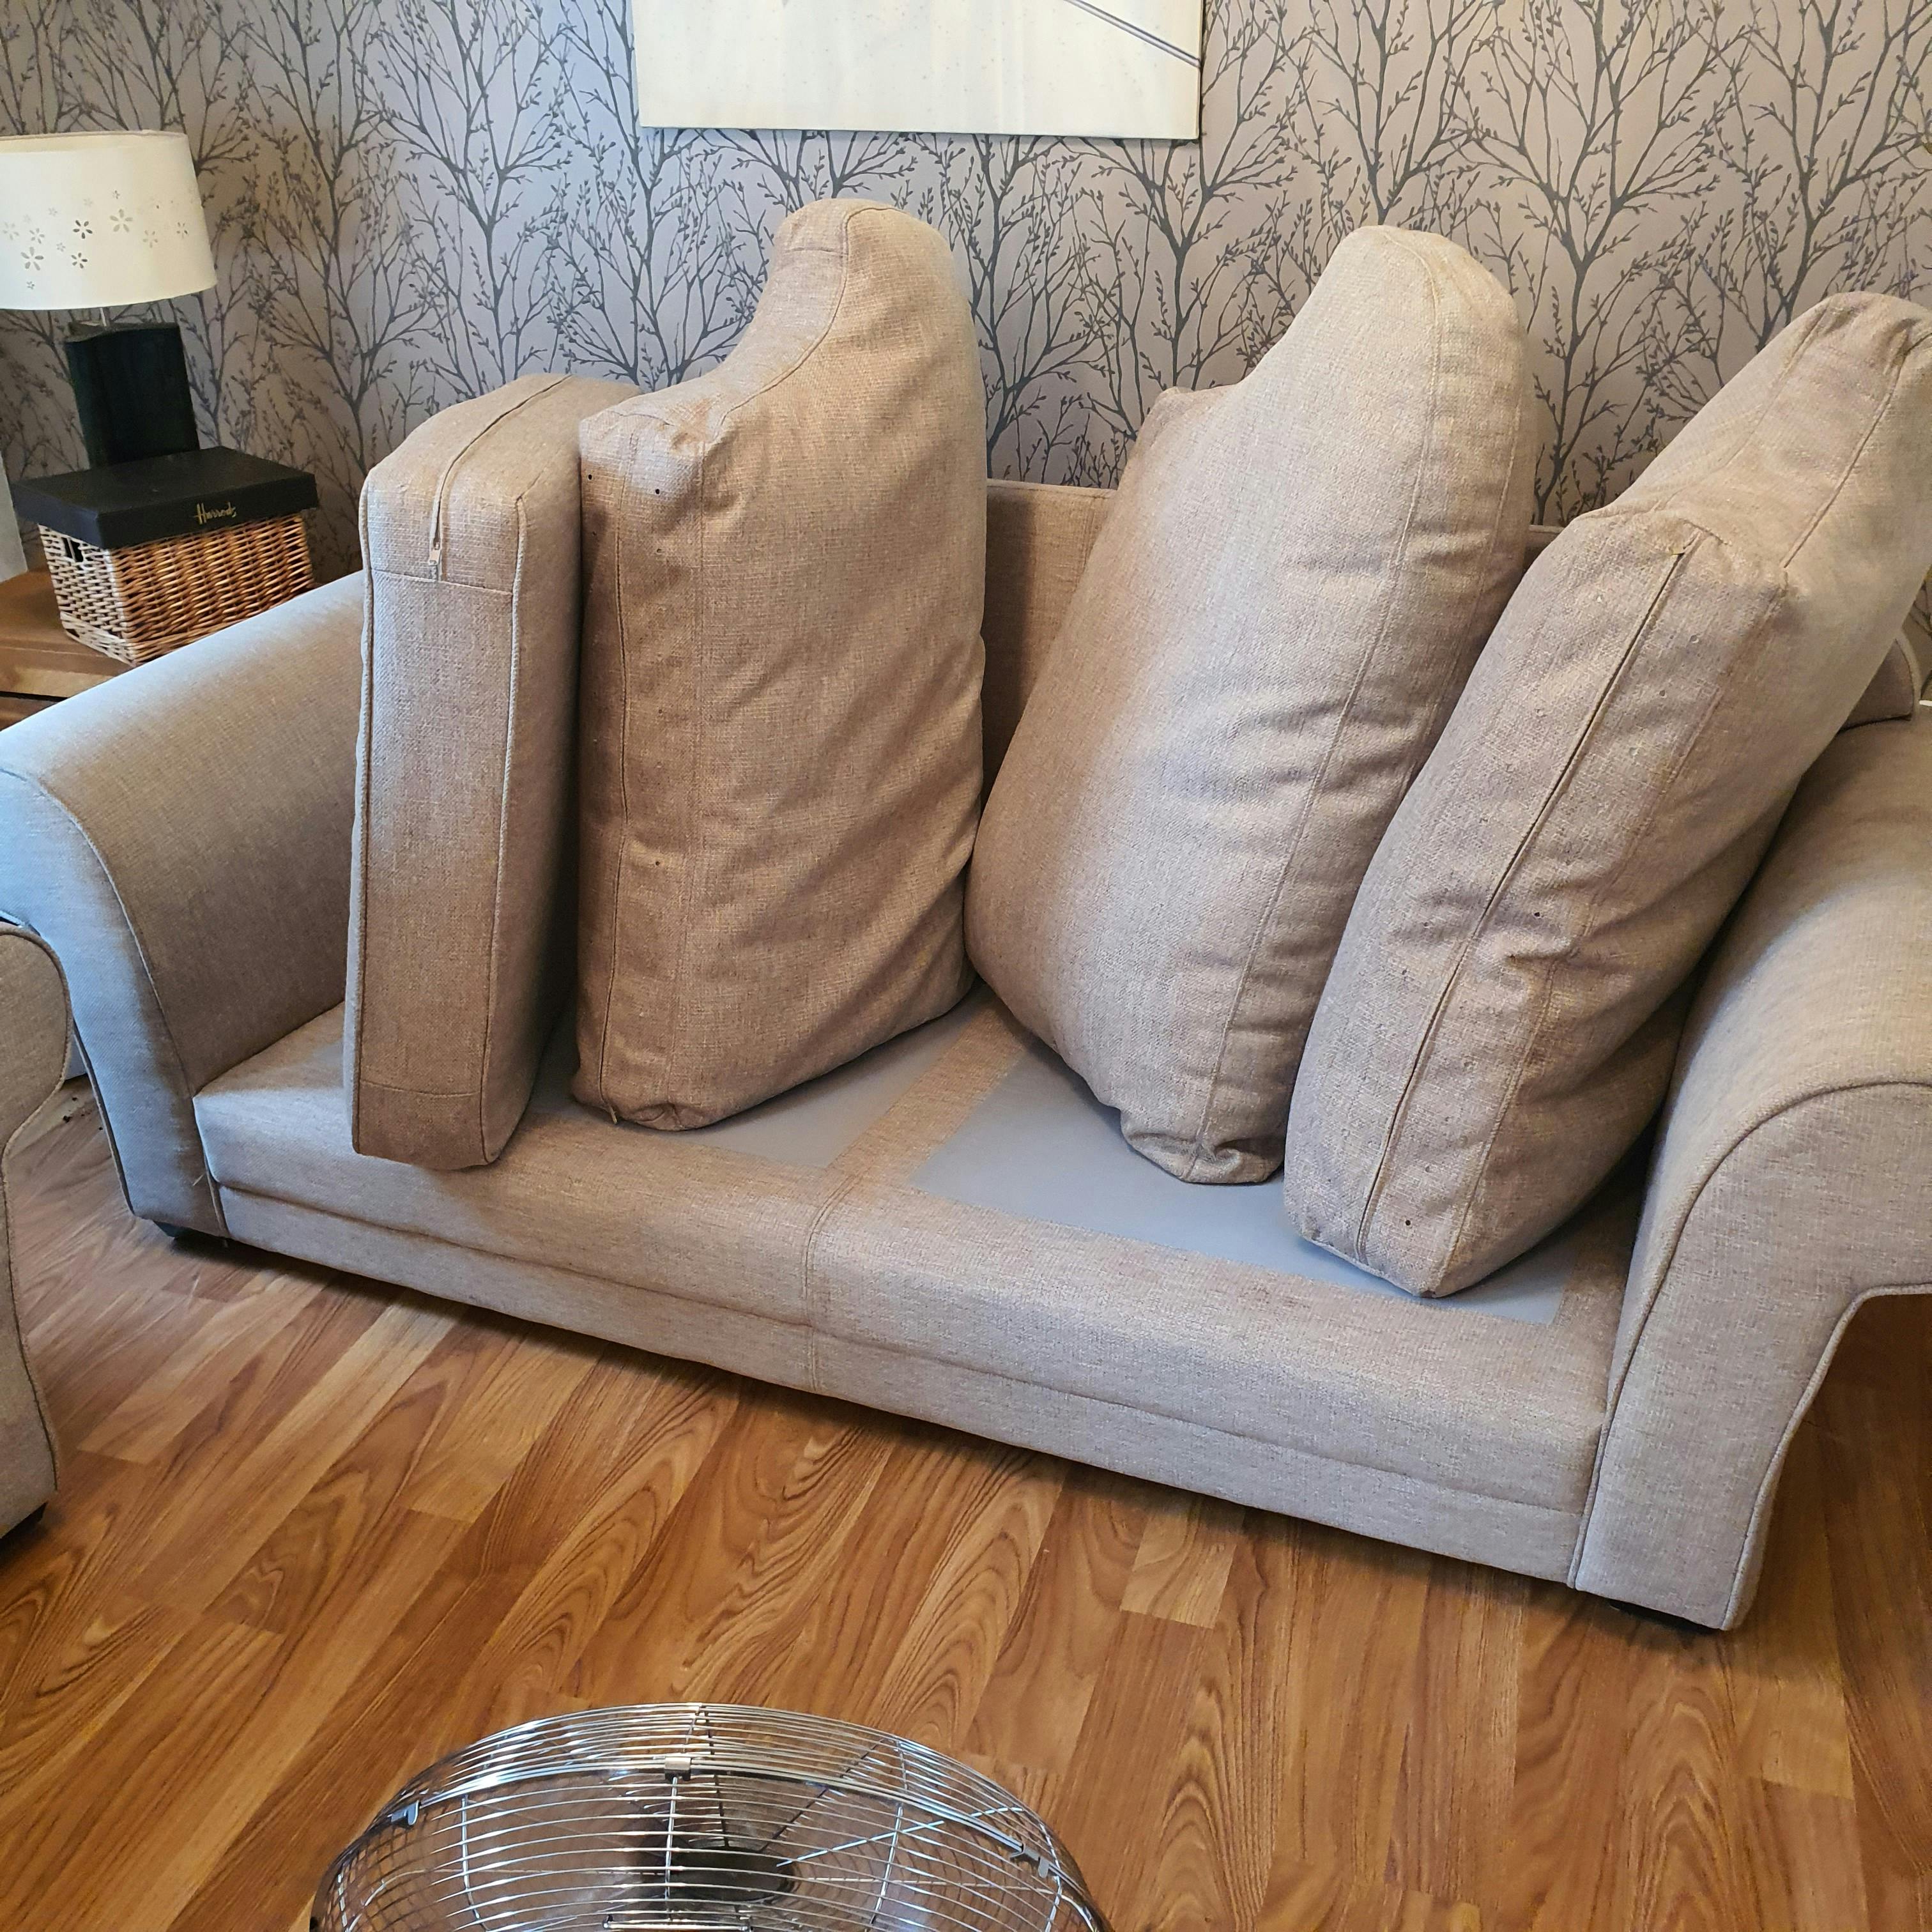 Revitalized and Elegant Sofa Post-Cleaning by Carpetech